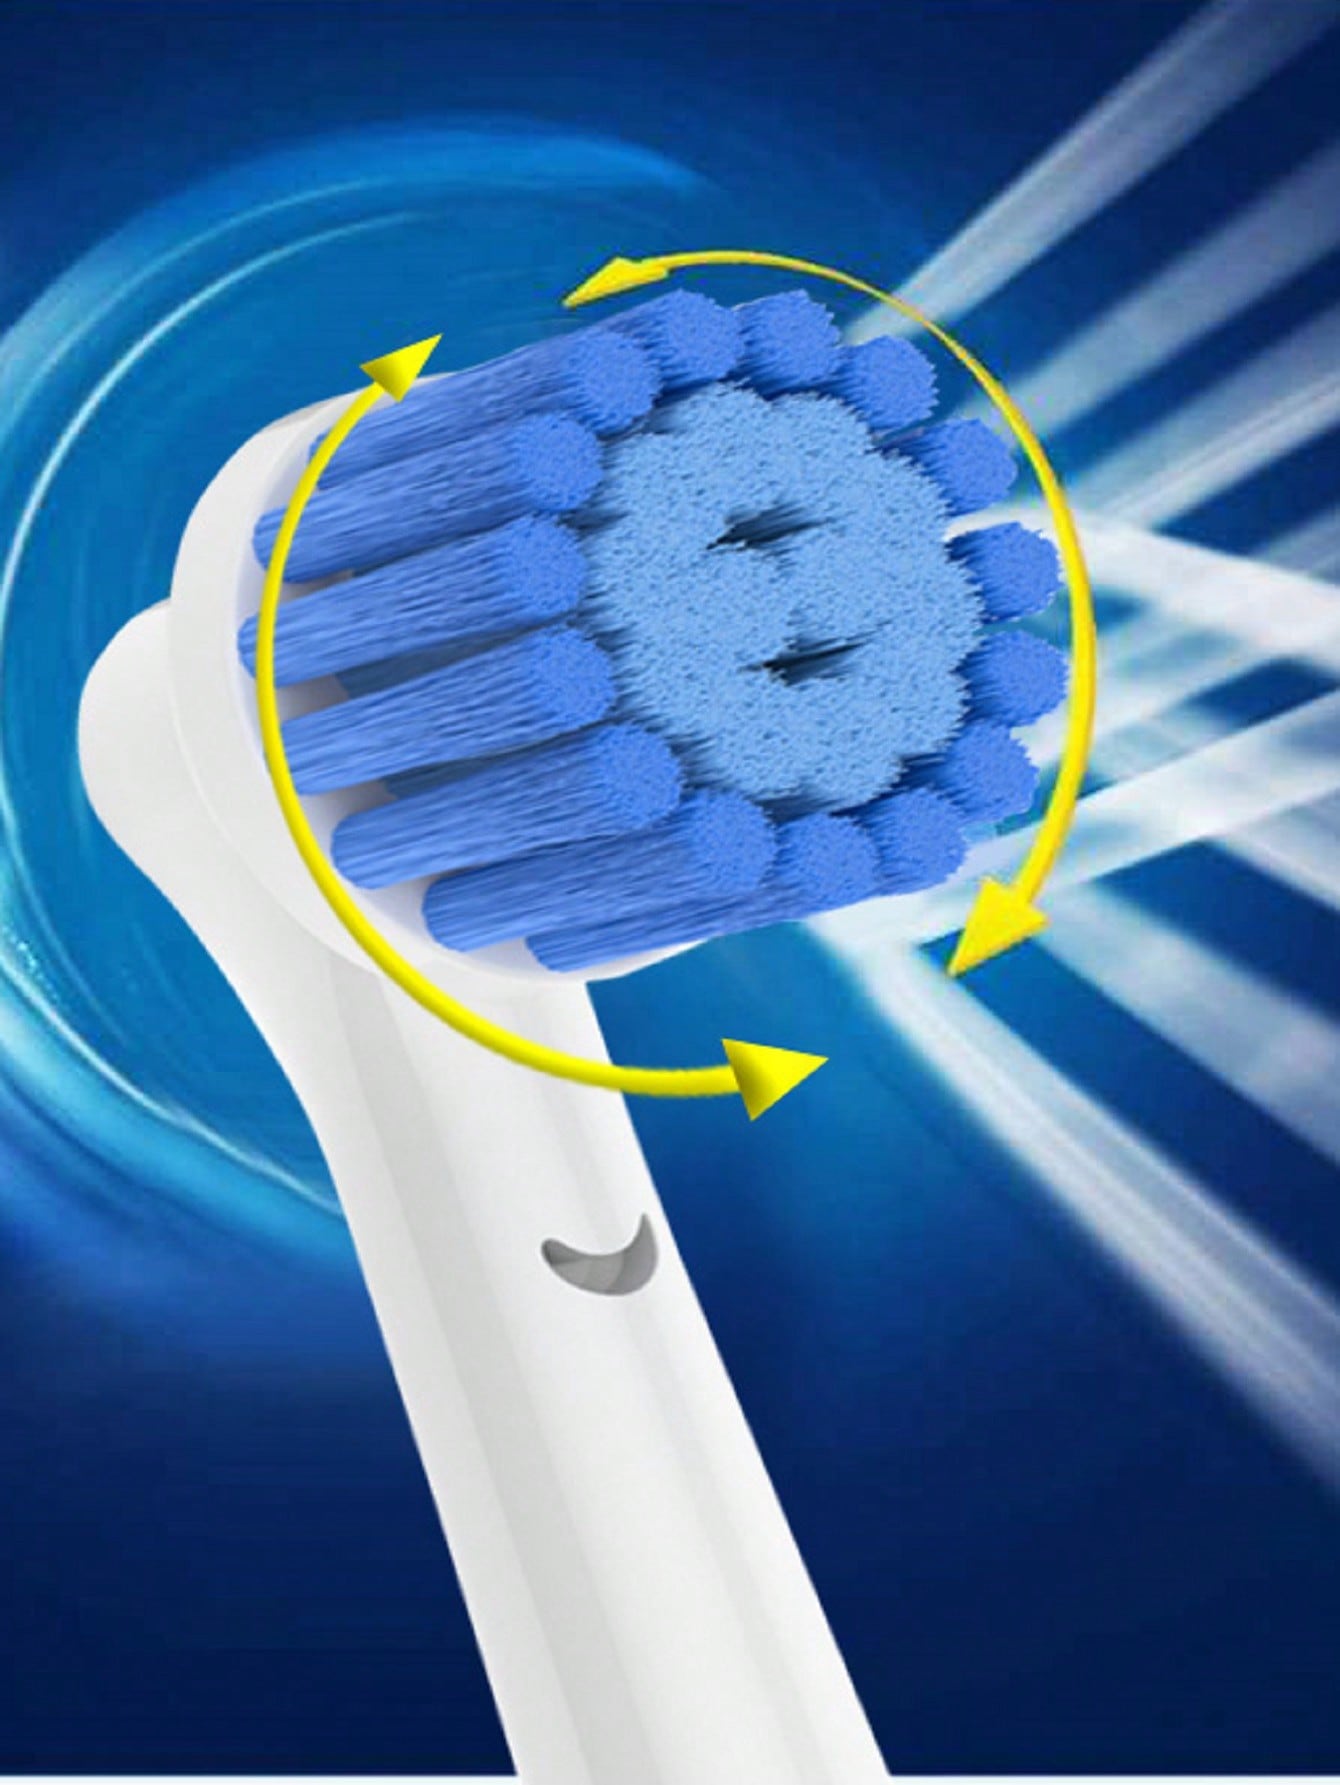 12pcs Nylon Sensitive Gum Care Toothbrush Head Compatible With Oral B Electric Toothbrush